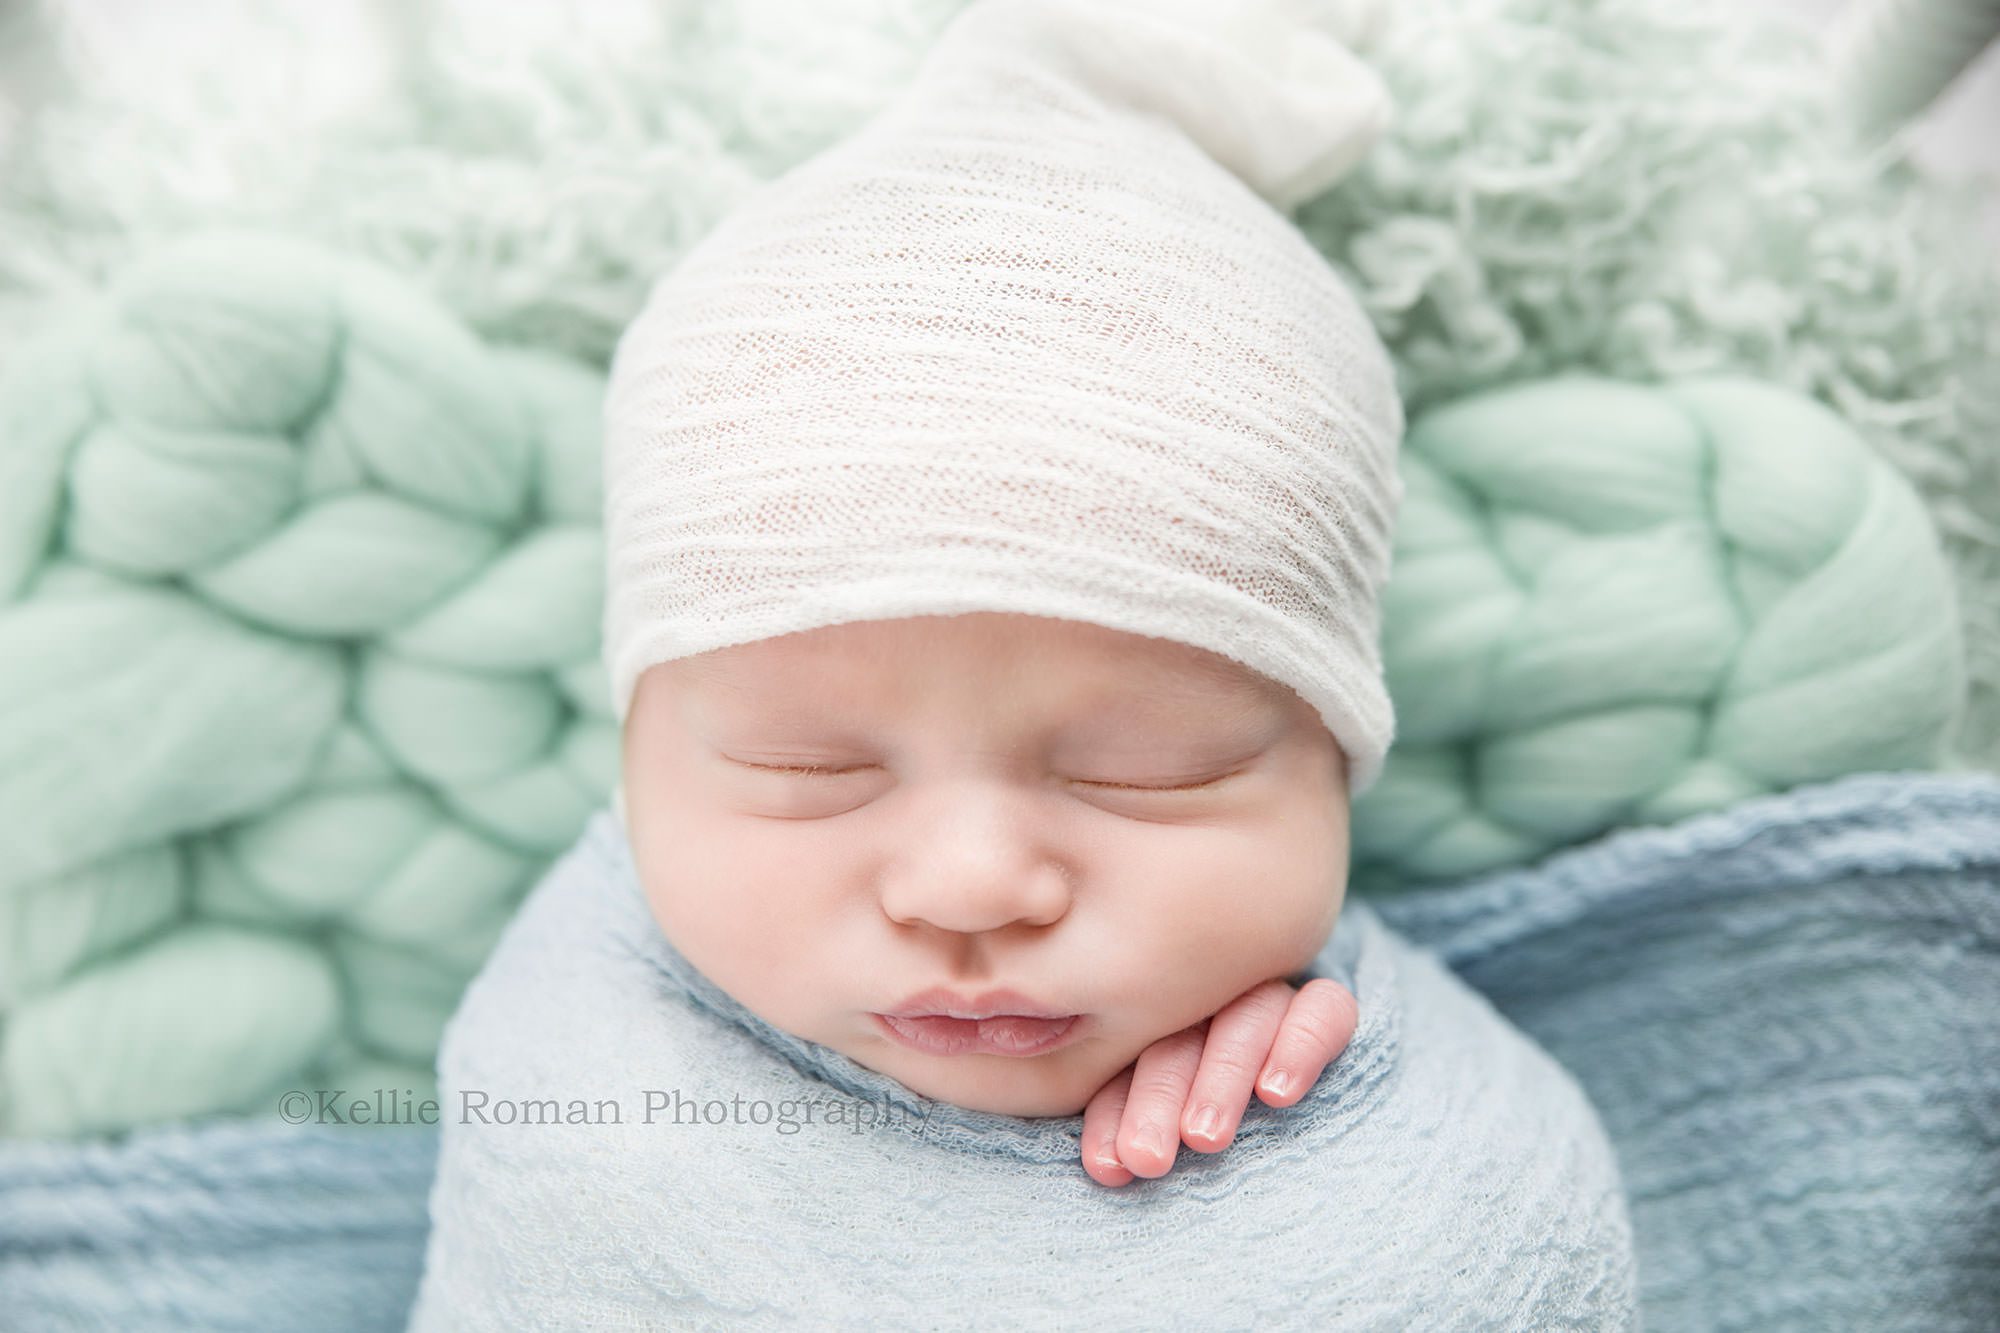 texas roots a newborn boy from kenosha in a Milwaukee photographers studio he is sleeping onto of a mint colored layering fabric with a white hat on and a blue wrap over him his left fingers are sticking out of the wrap